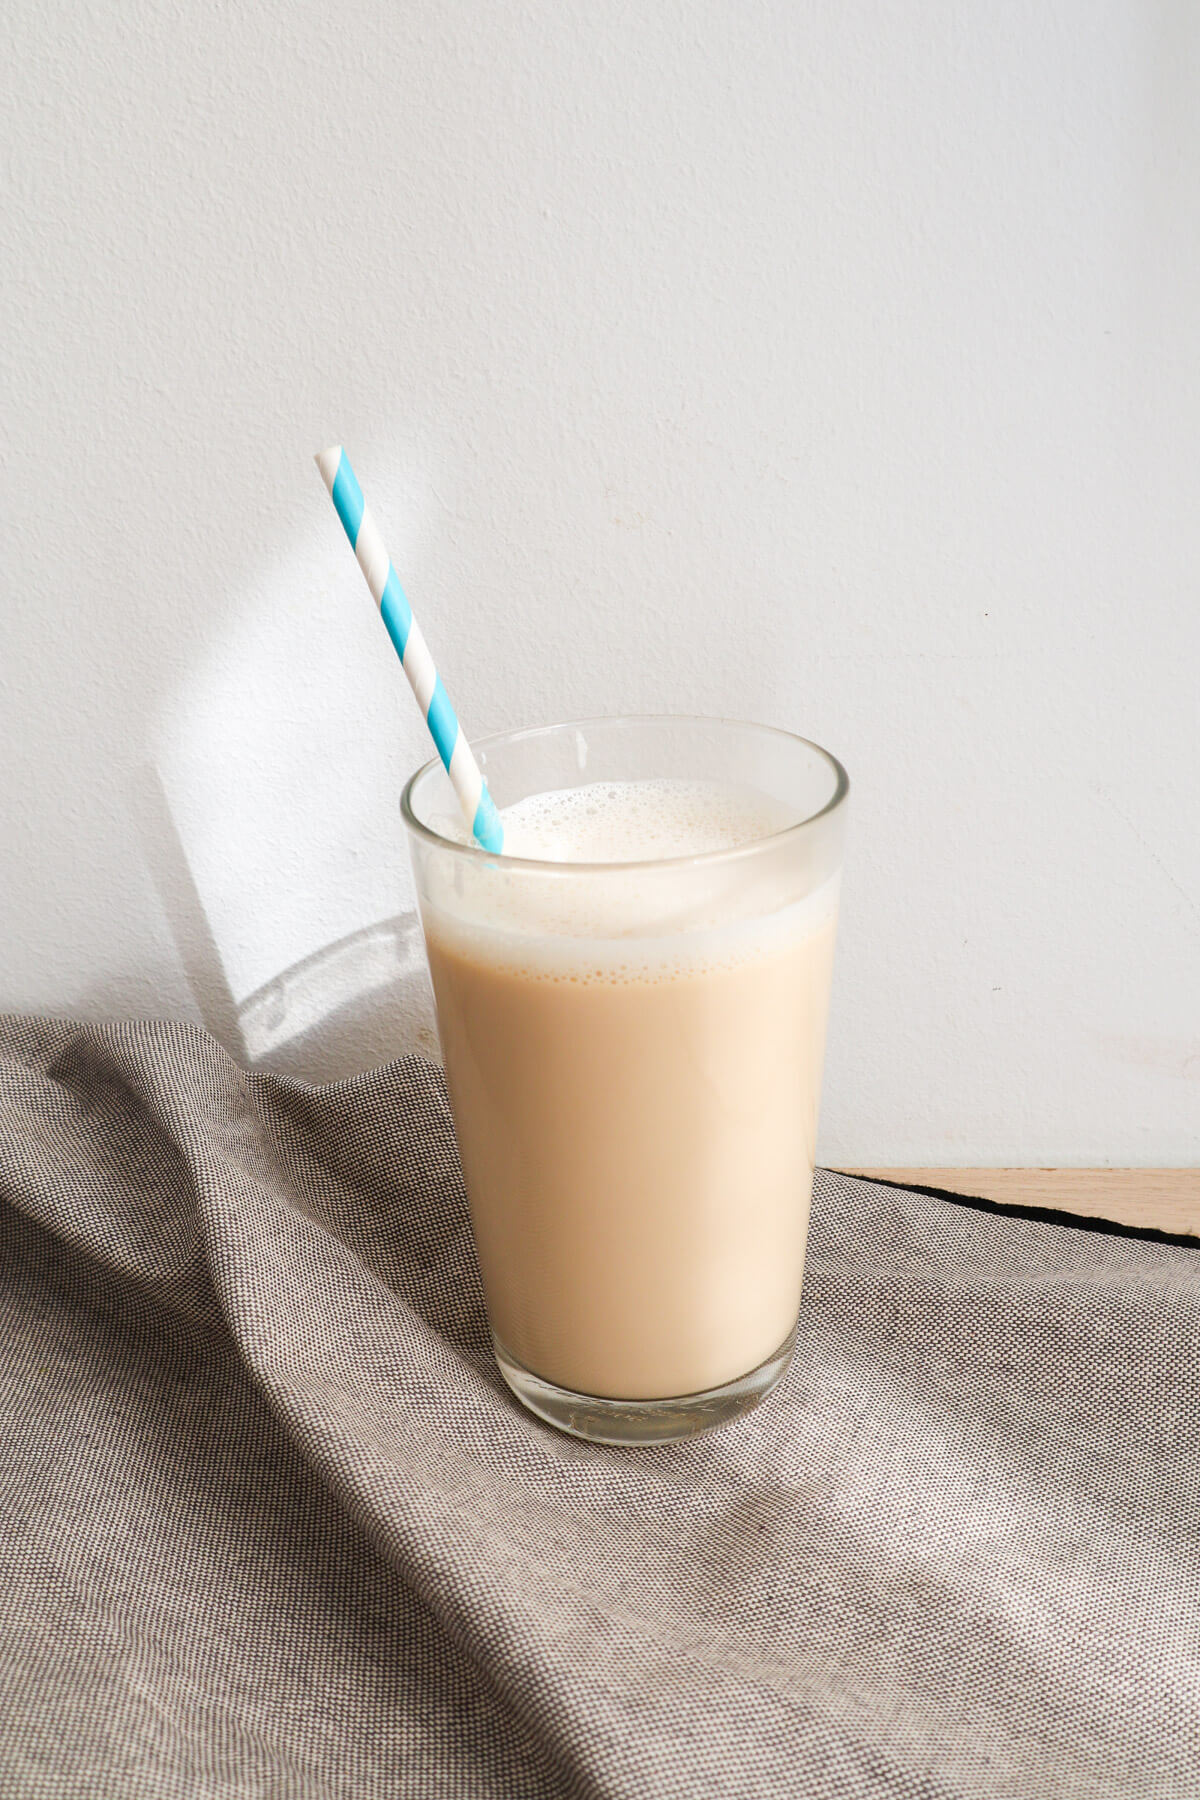 Vanilla milk in a glass with blue straw. 